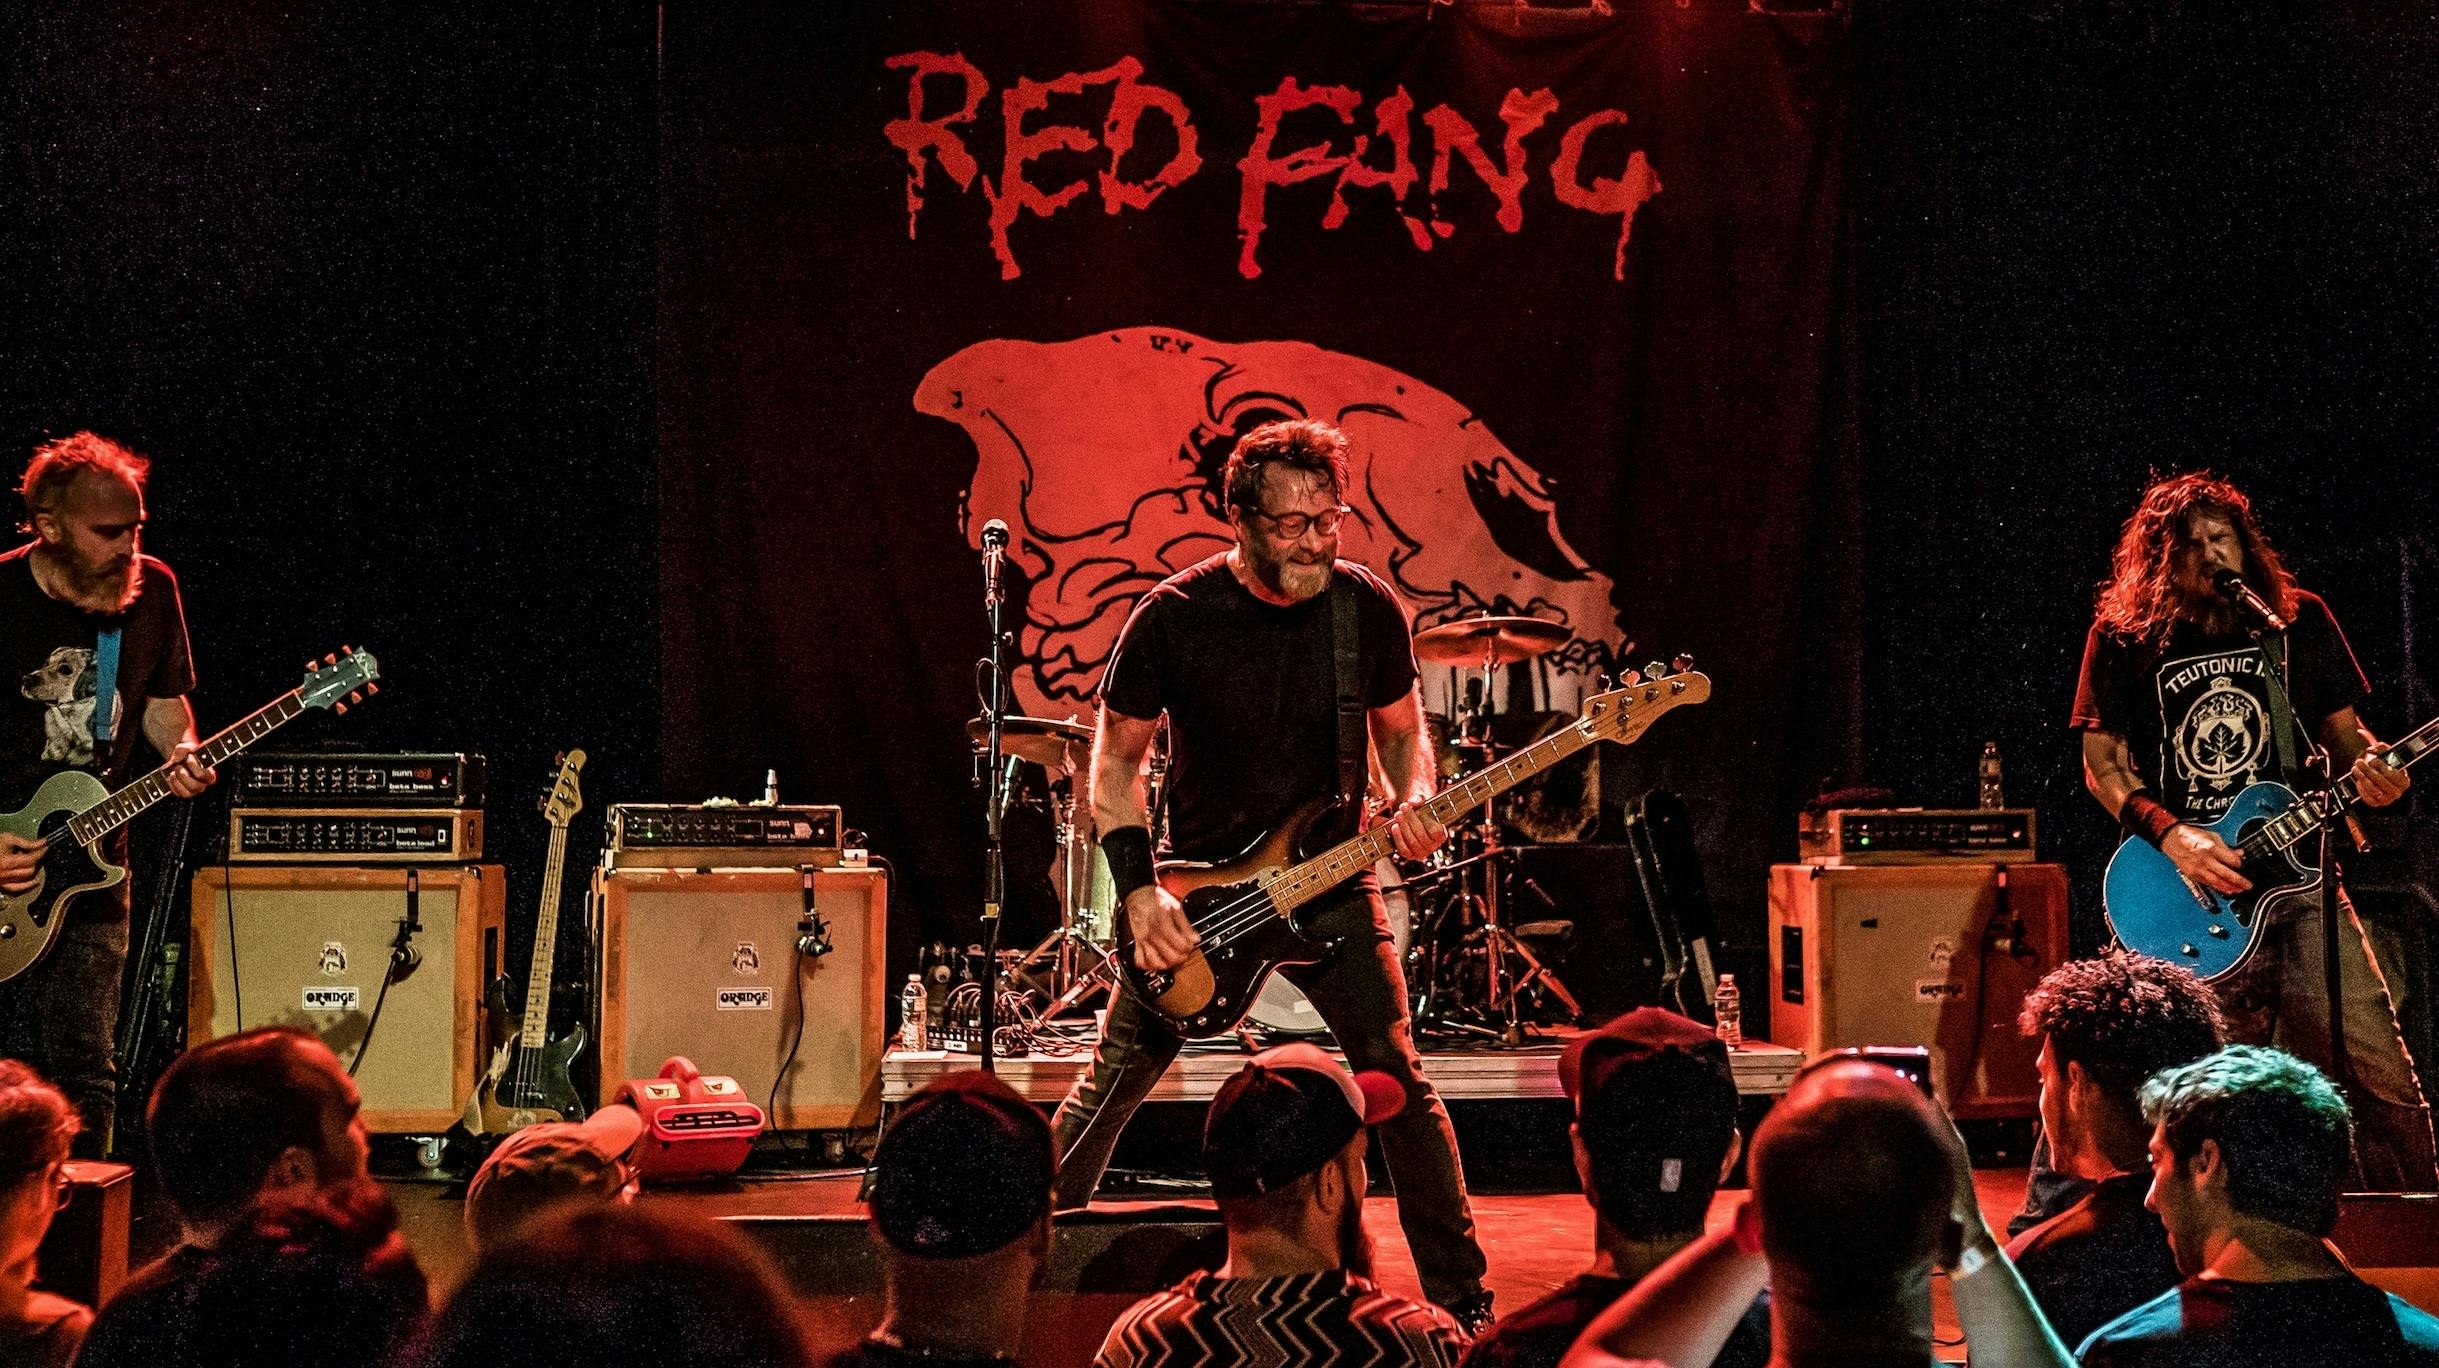 Gallery: Red Fang, Big Business, and Dead Now Perform At Music Hall of Williamsburg